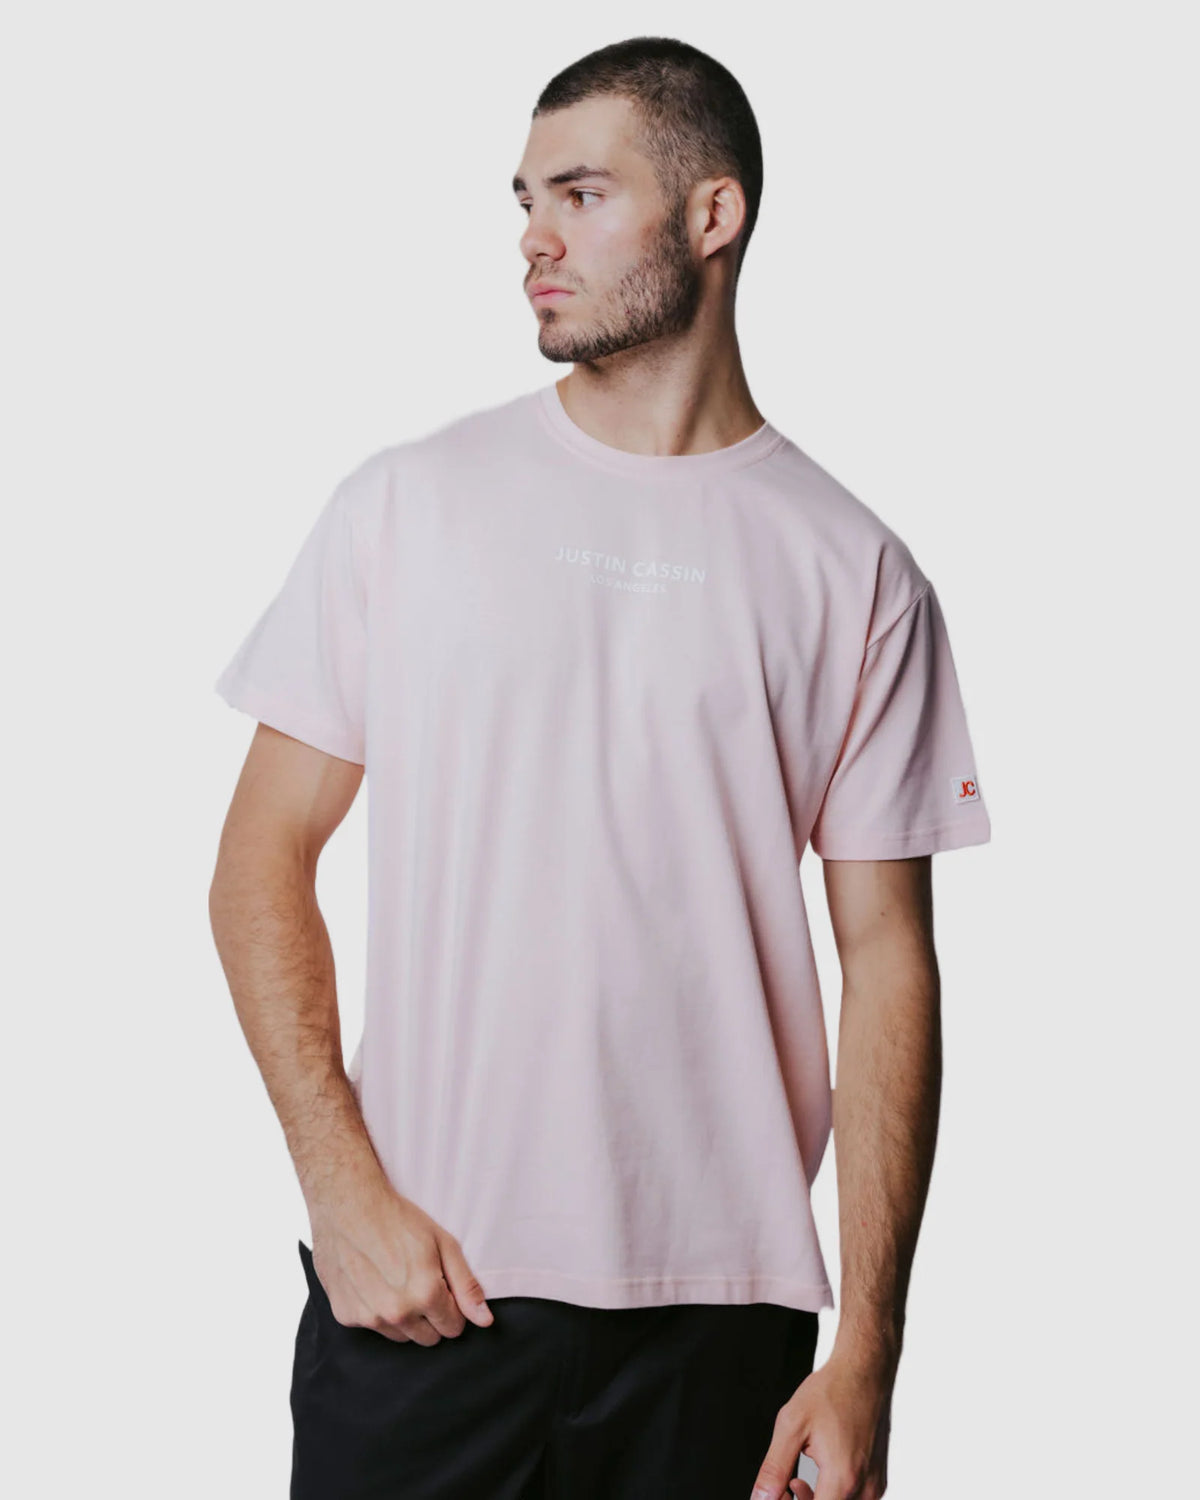 Justin Cassin Essential T-Shirt in Dusty Pink Color